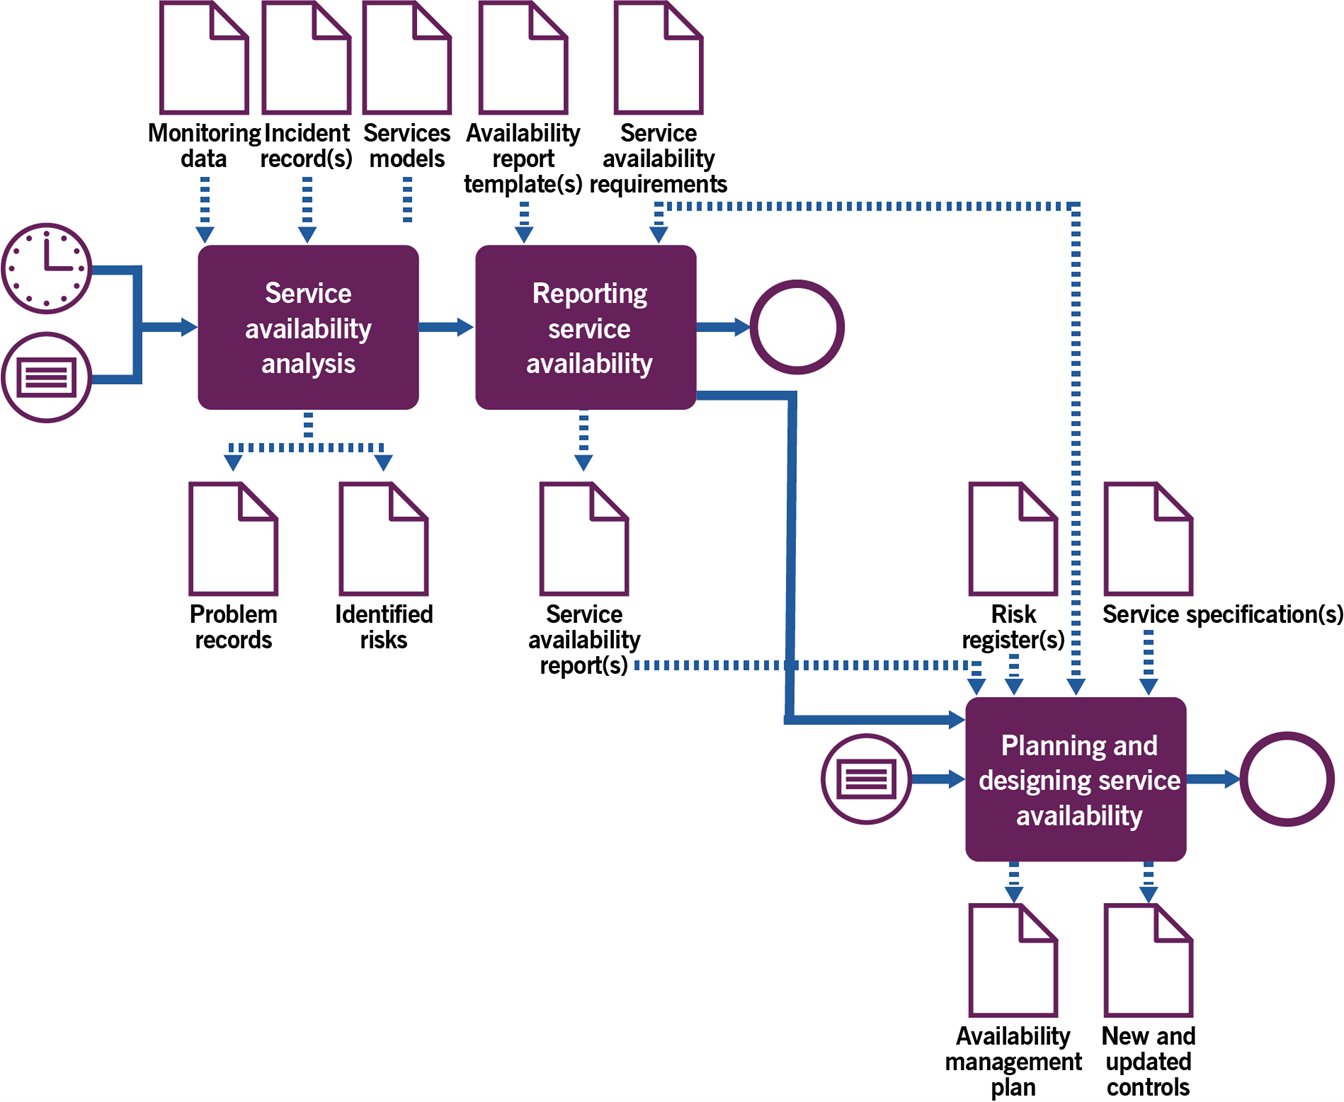 workflow diagram showing the analysis and improving services availability process